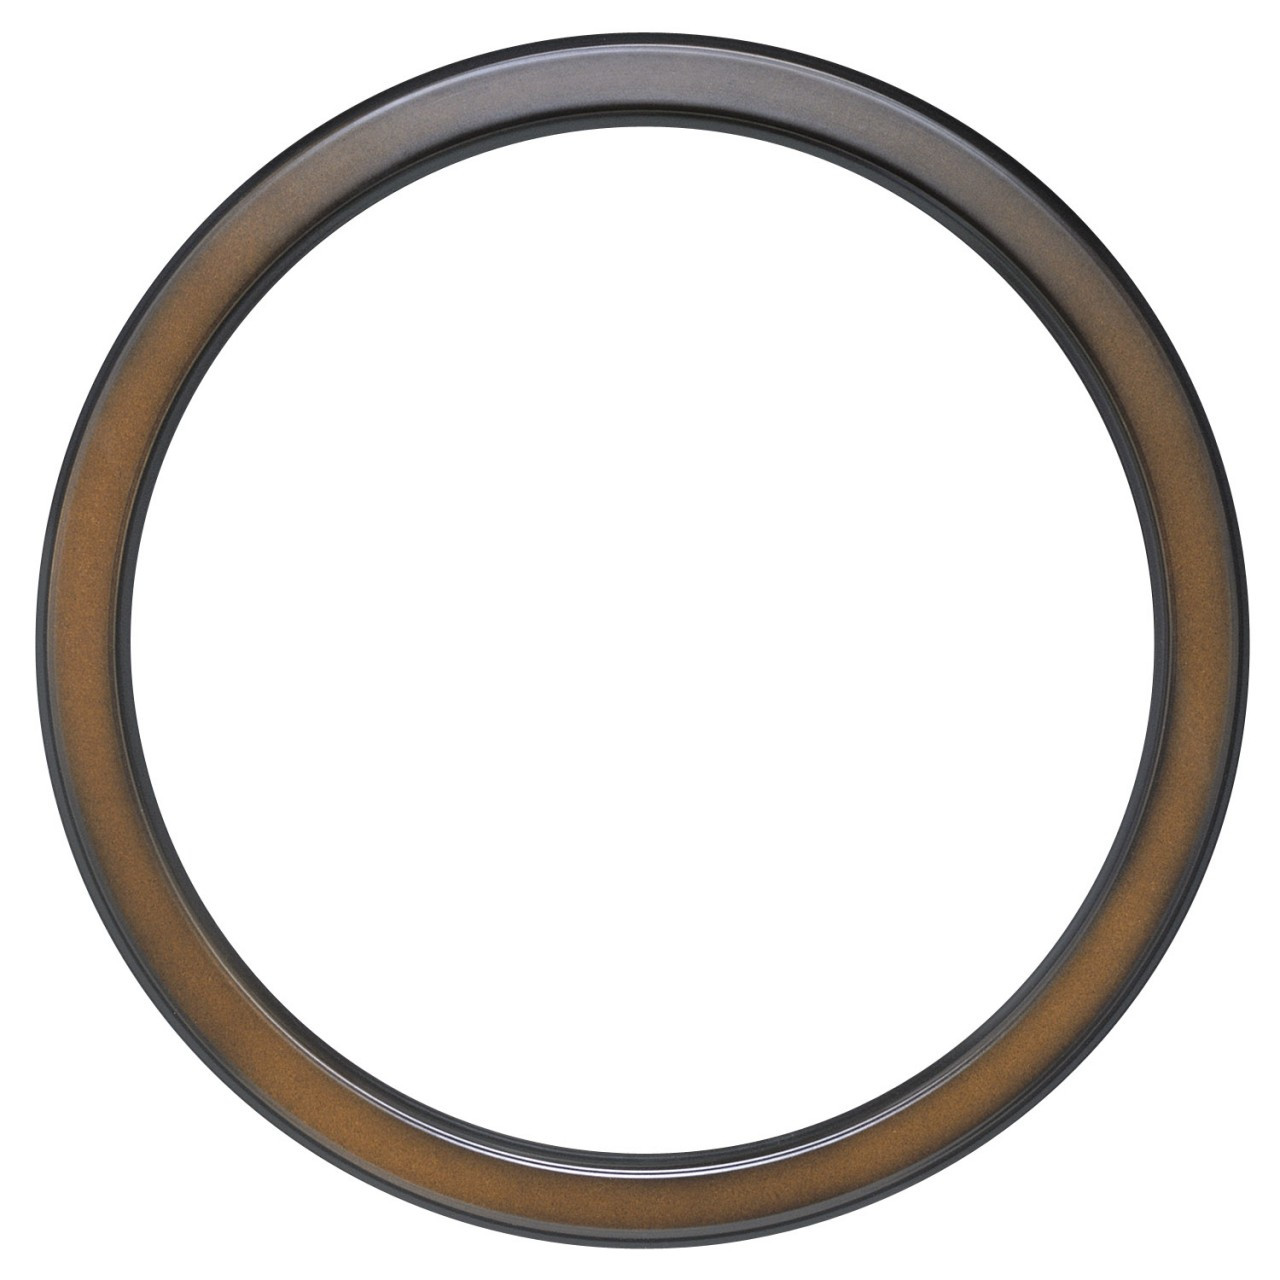 Round Frame in Walnut Finish| Simple Brown Wooden Picture Frames with